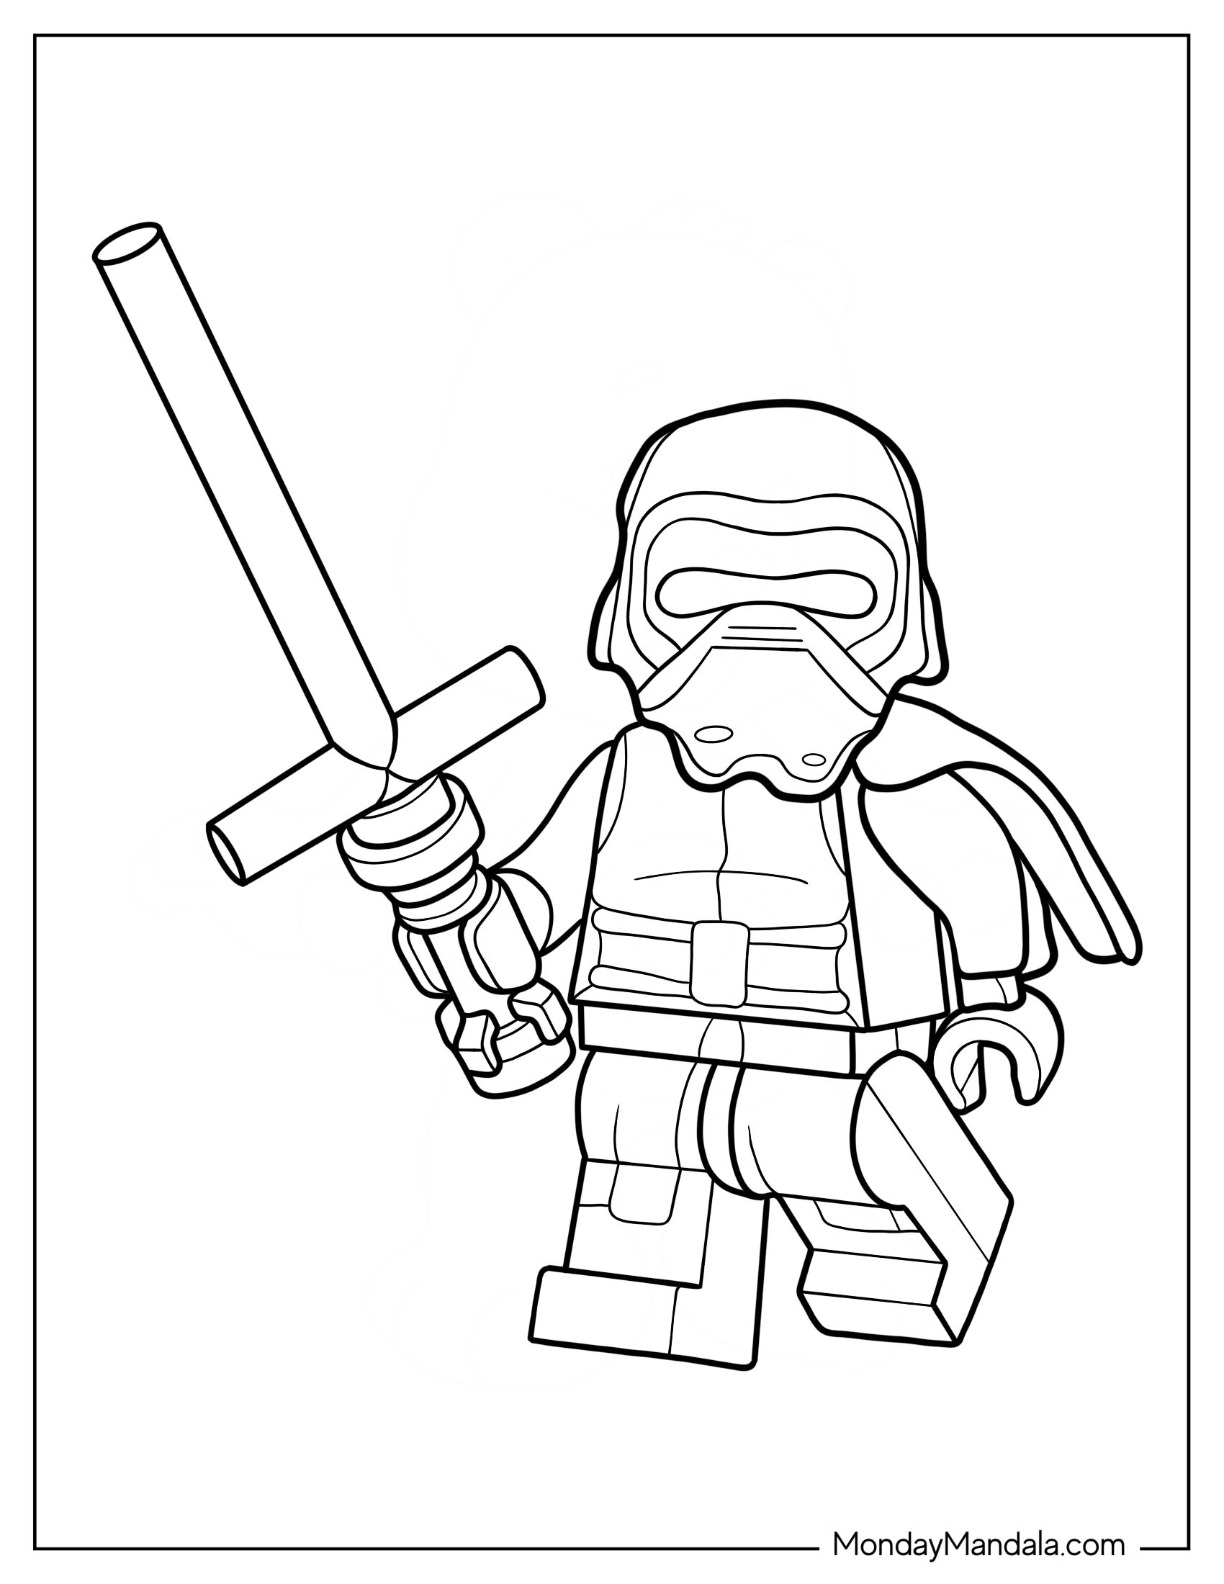 Lego star wars coloring pages free pdf printables